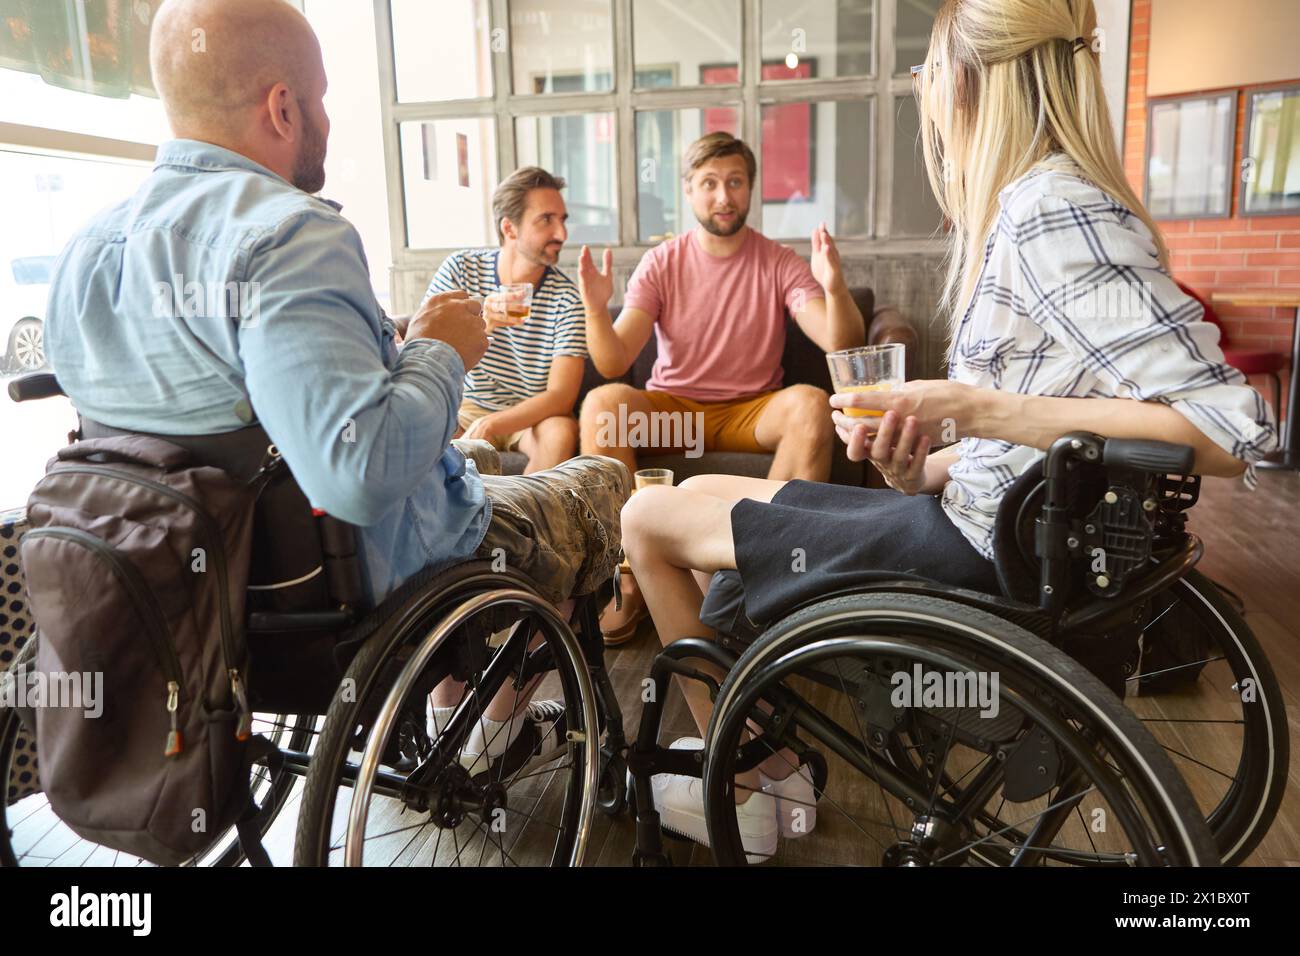 A group of friends, including people who use wheelchairs, engaged in lively conversation and enjoying drinks together in a sunny café setting. Stock Photo